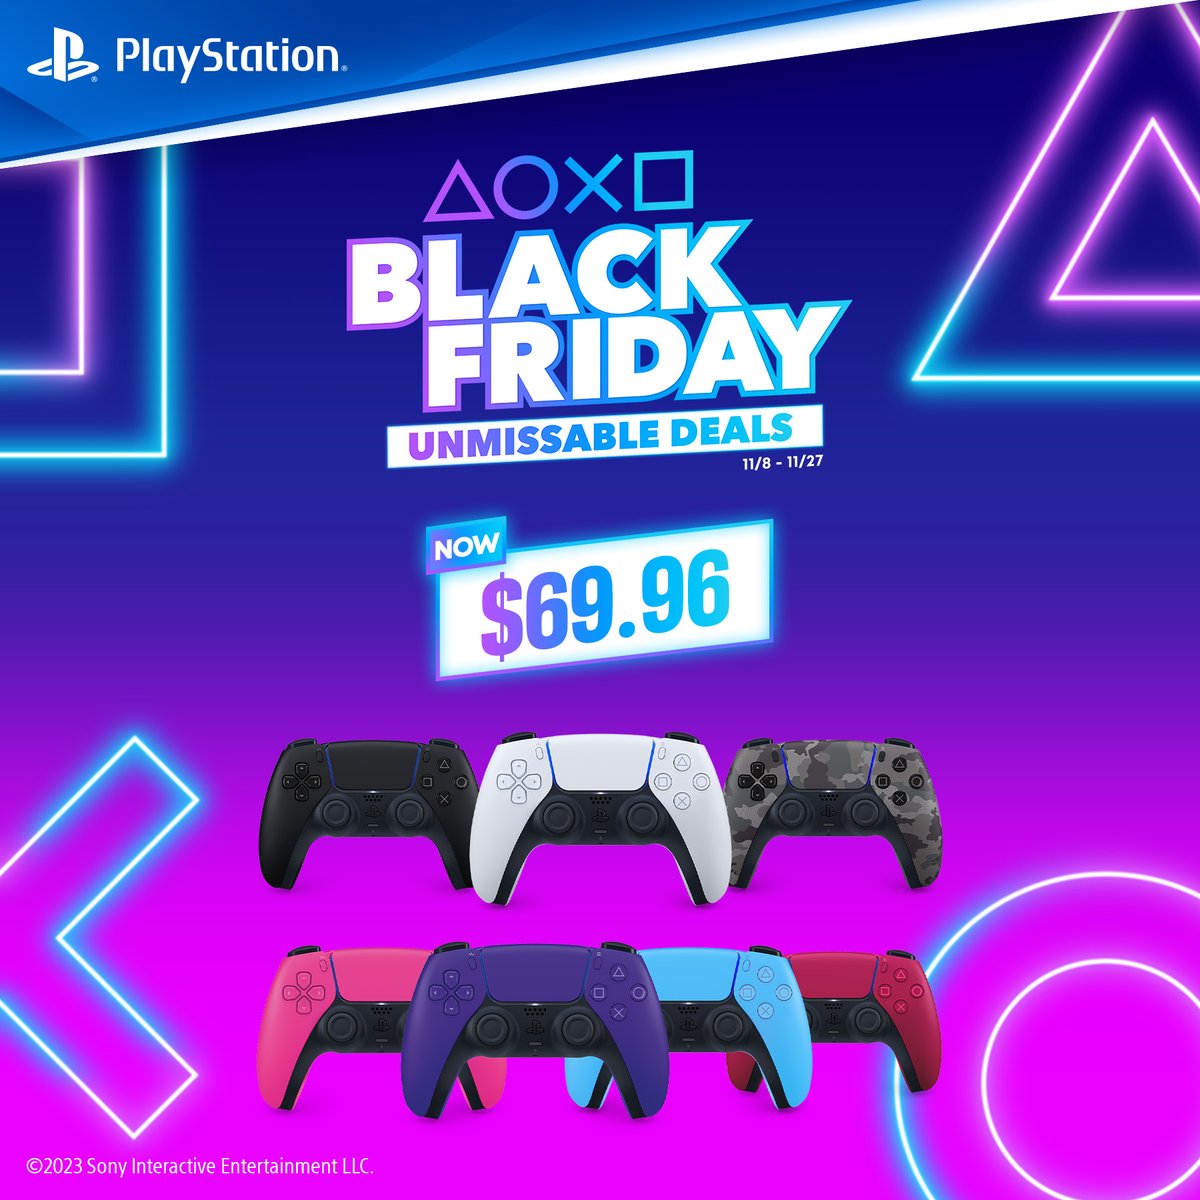 We have a DualSense that you may like this deal... 😏 Save $25 on PlayStation 5 DualSense Wireless Controllers at Walmart Canada for Black Friday! ➡️ ms.spr.ly/6017iEmfR